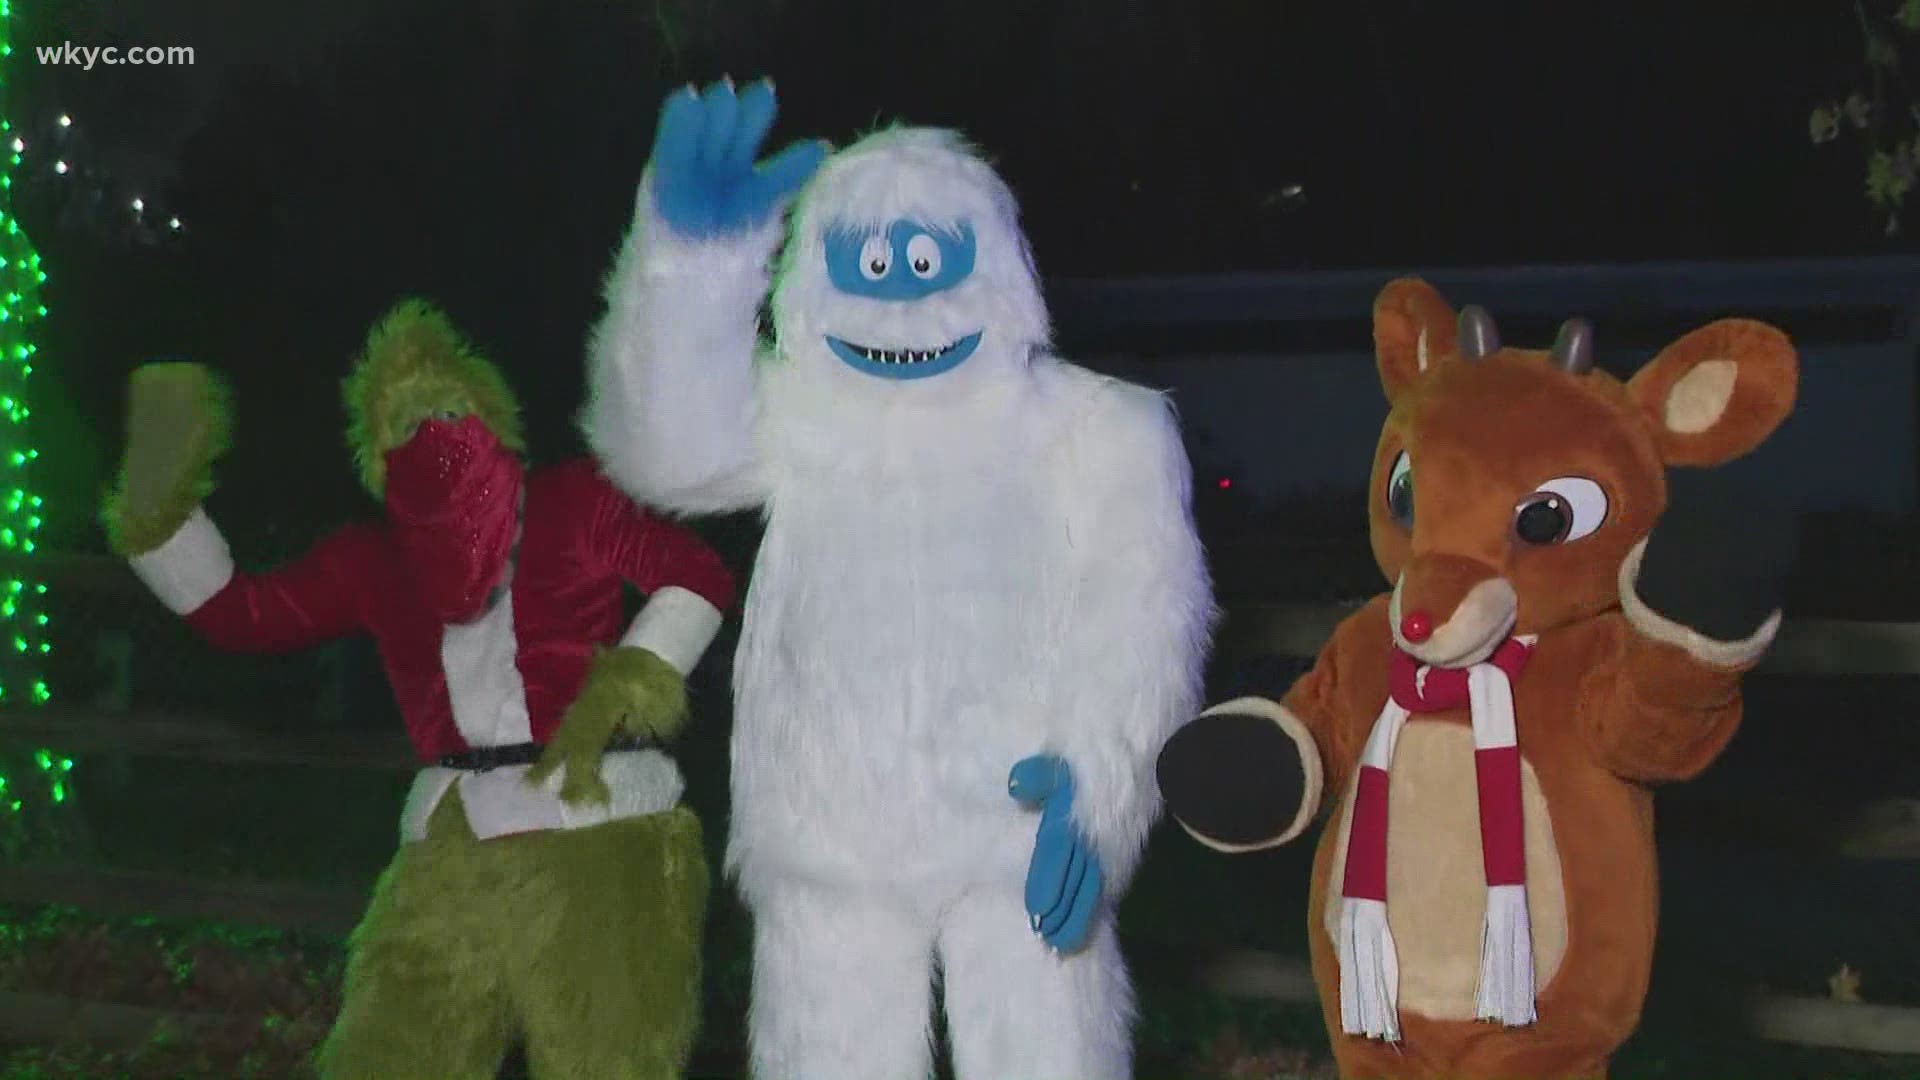 The holidays have returned to the Cleveland Metroparks Zoo. Here's a first look at their Wild Winter Lights event.